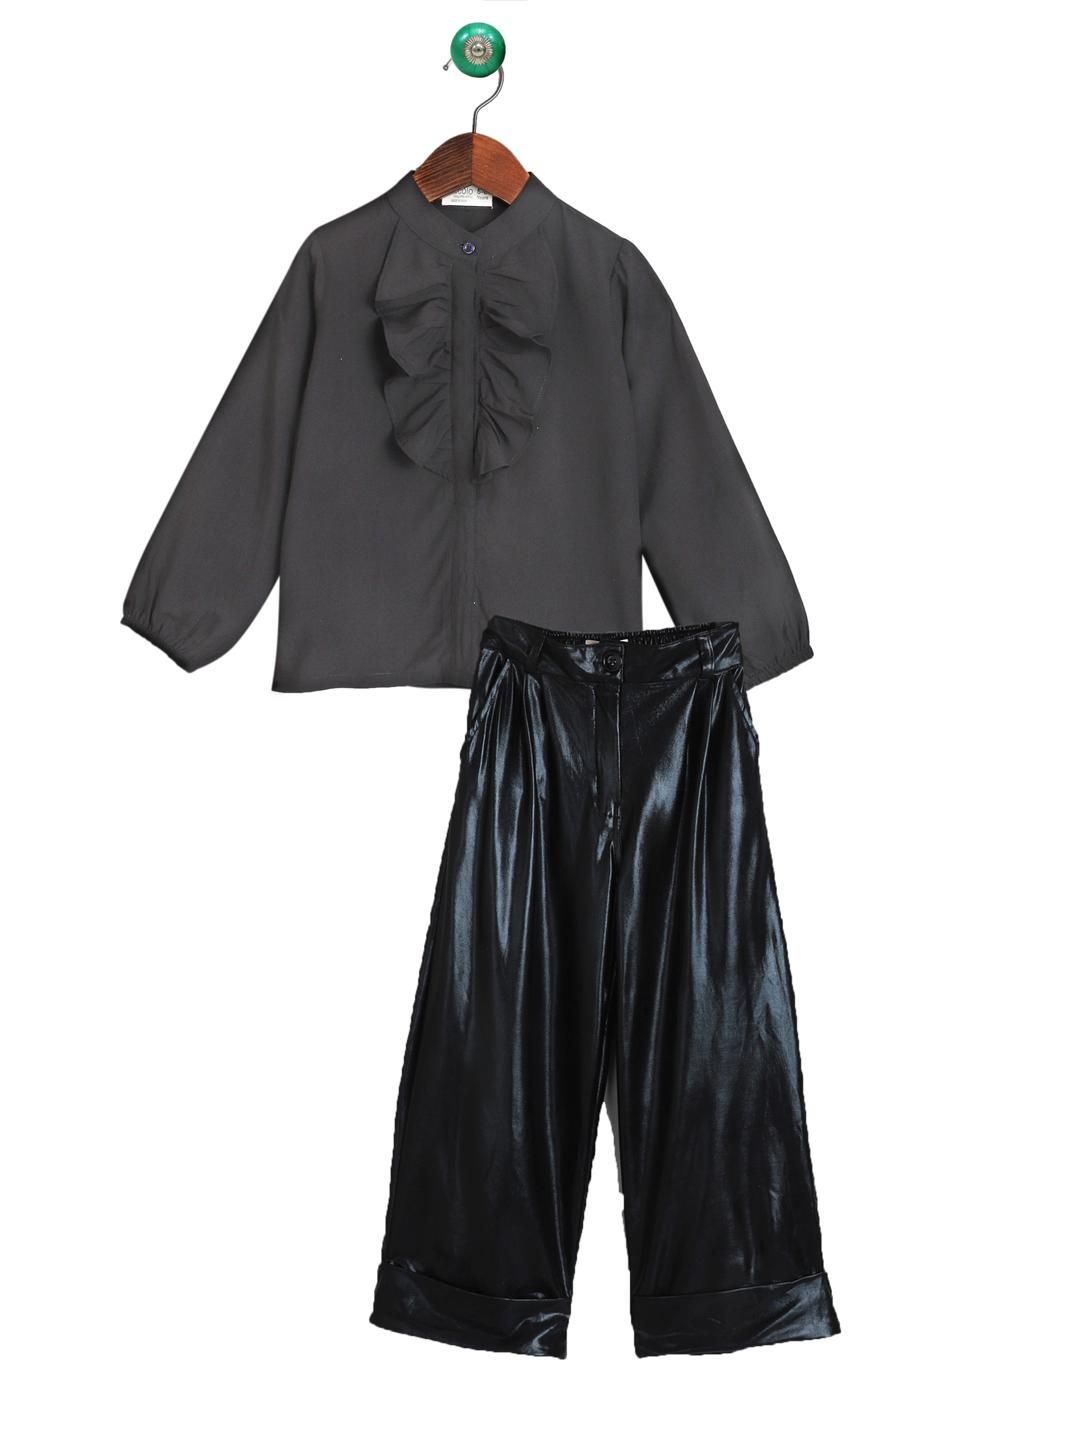 Scoop Girls Faux Leather Pants, Sizes 4-12 